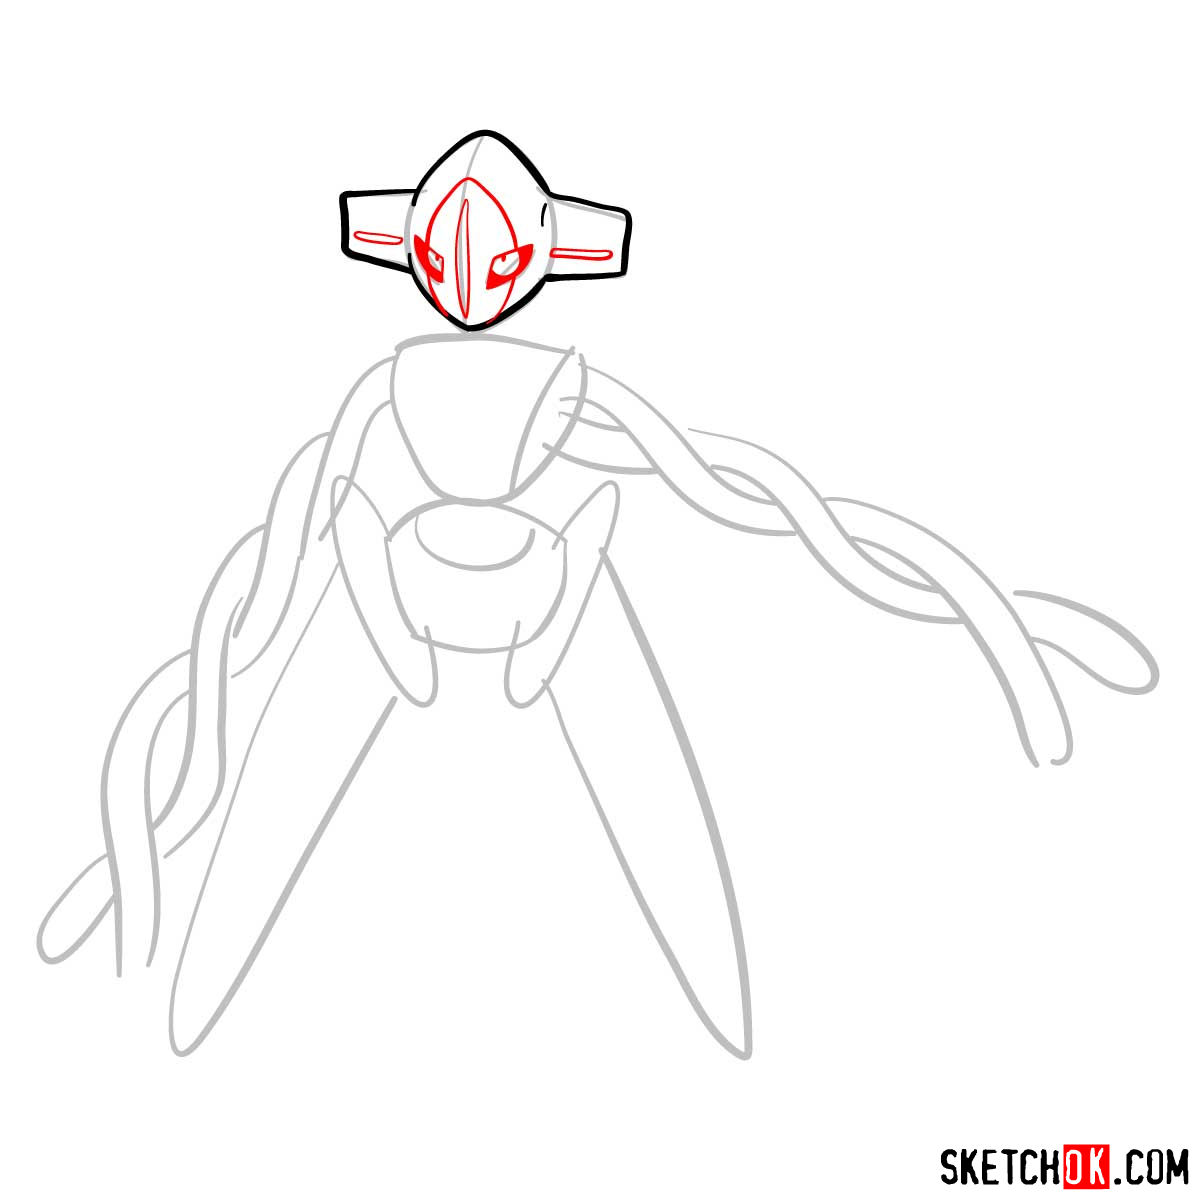 Deoxys In Speed Form Coloring Page Free Printable Coloring Pages | vlr ...